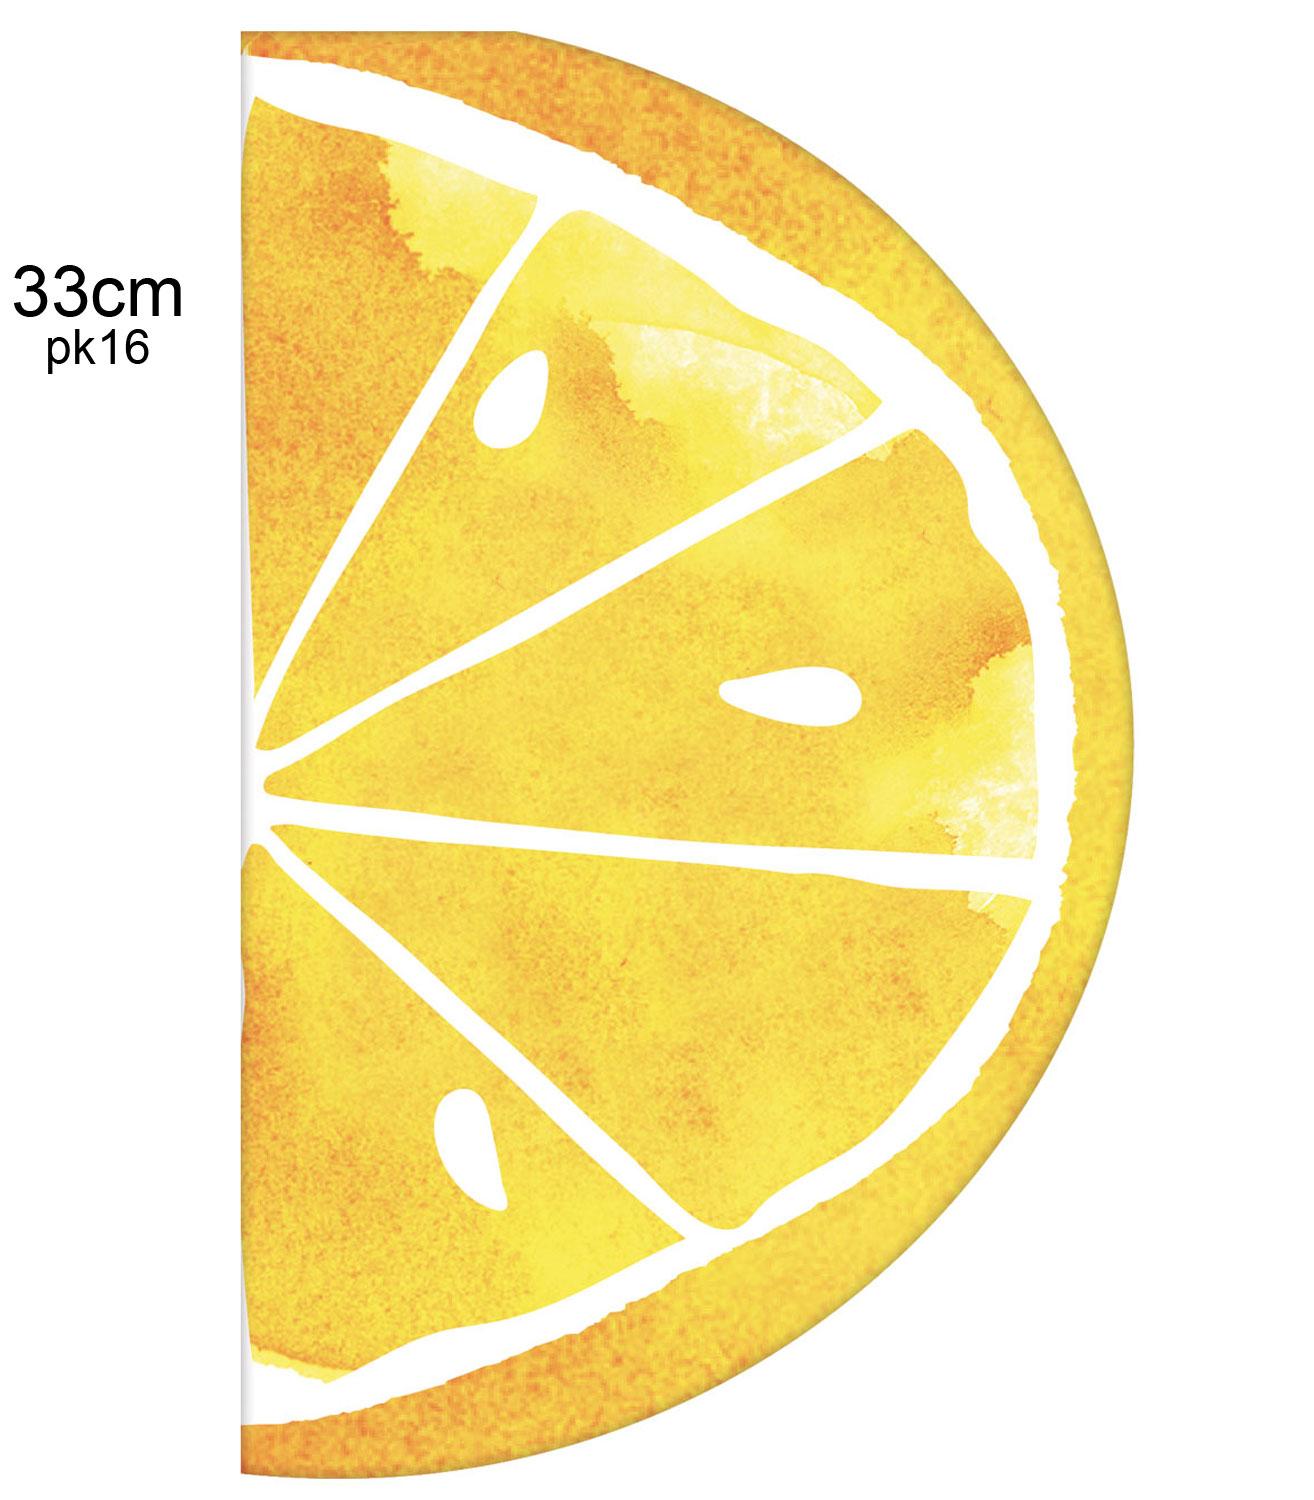 Just Chillin Fruit Salad Lemon Die-cut Luncheon Napkins pk16 2ply 33cm by Amscan 51777709 available here at Karnival Costumes online party shop